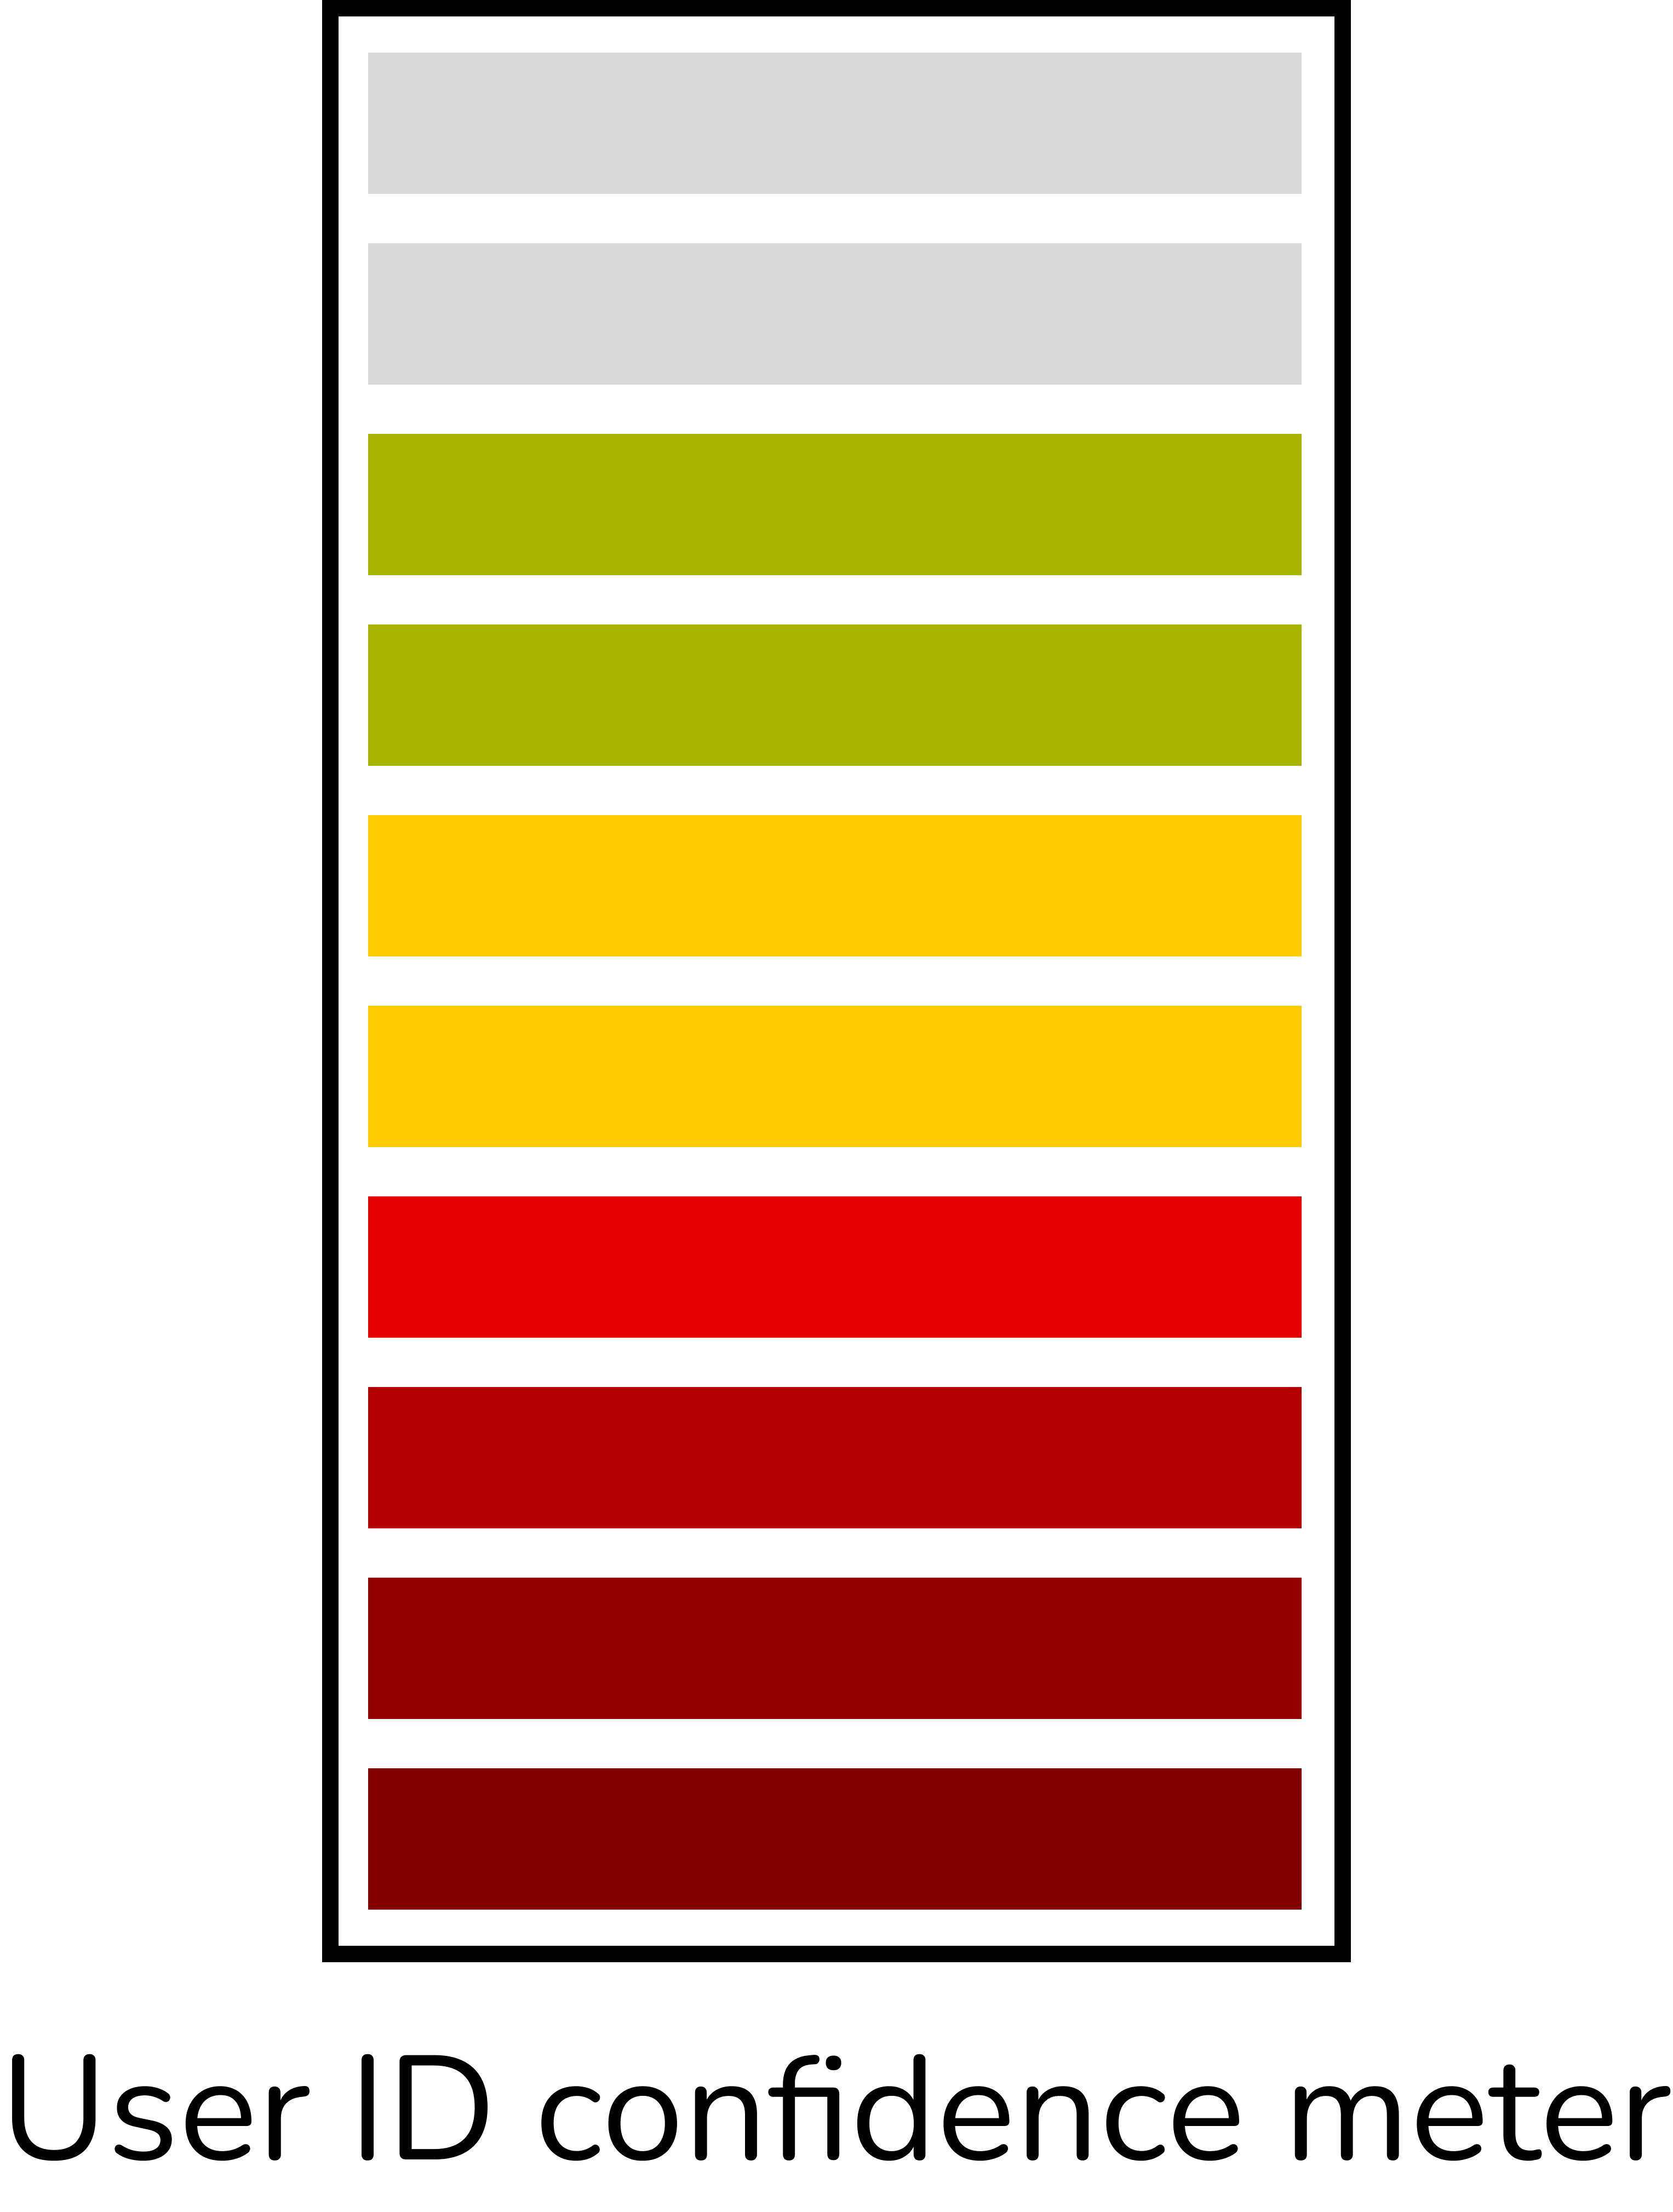 Coloured bars to show levels of confidence